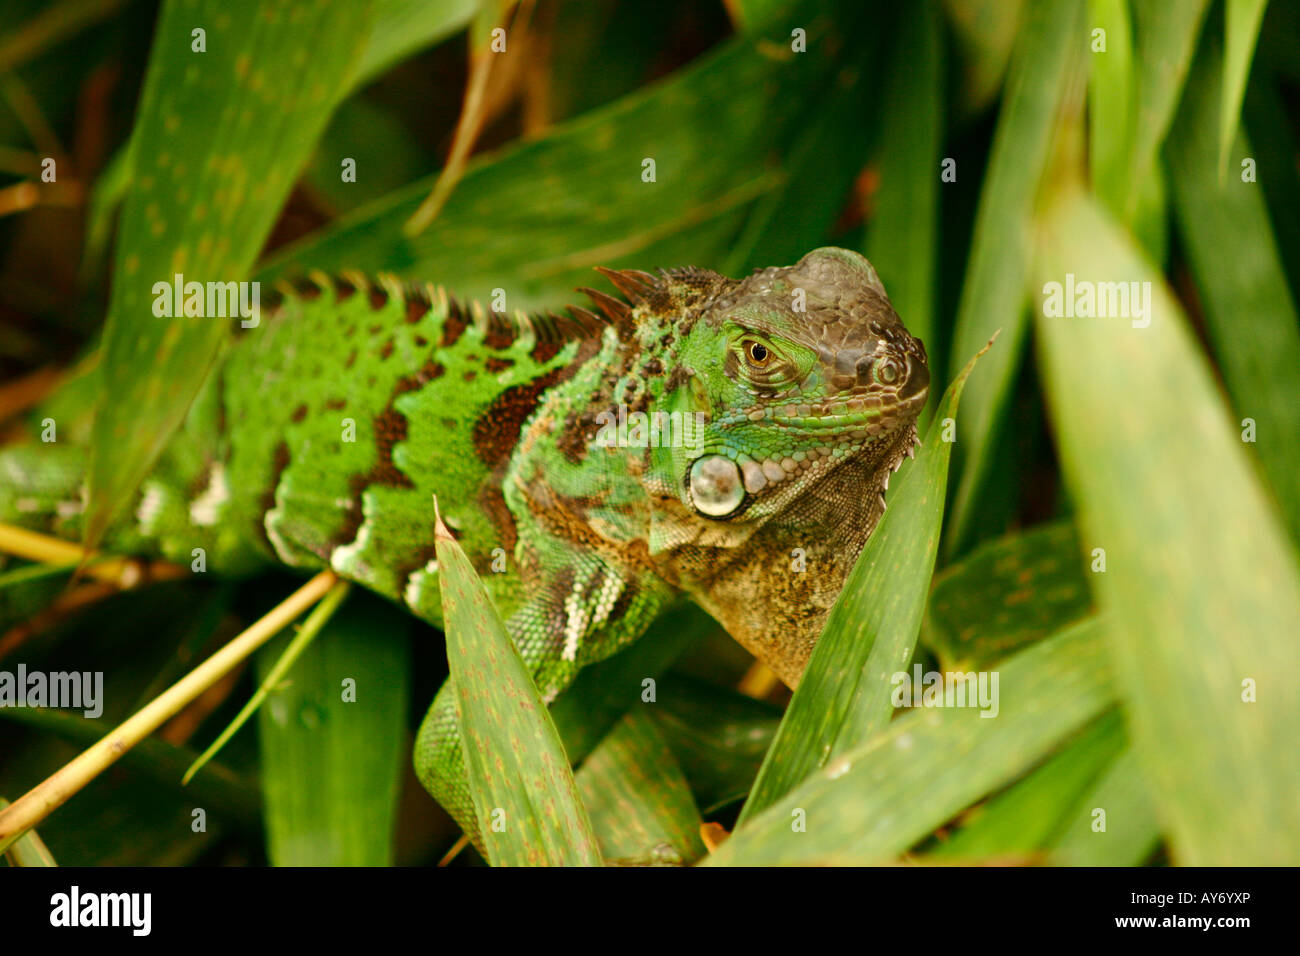 Green Iguana. Is a genus of lizard native to tropical areas of Central and South America and the Caribbean. Stock Photo